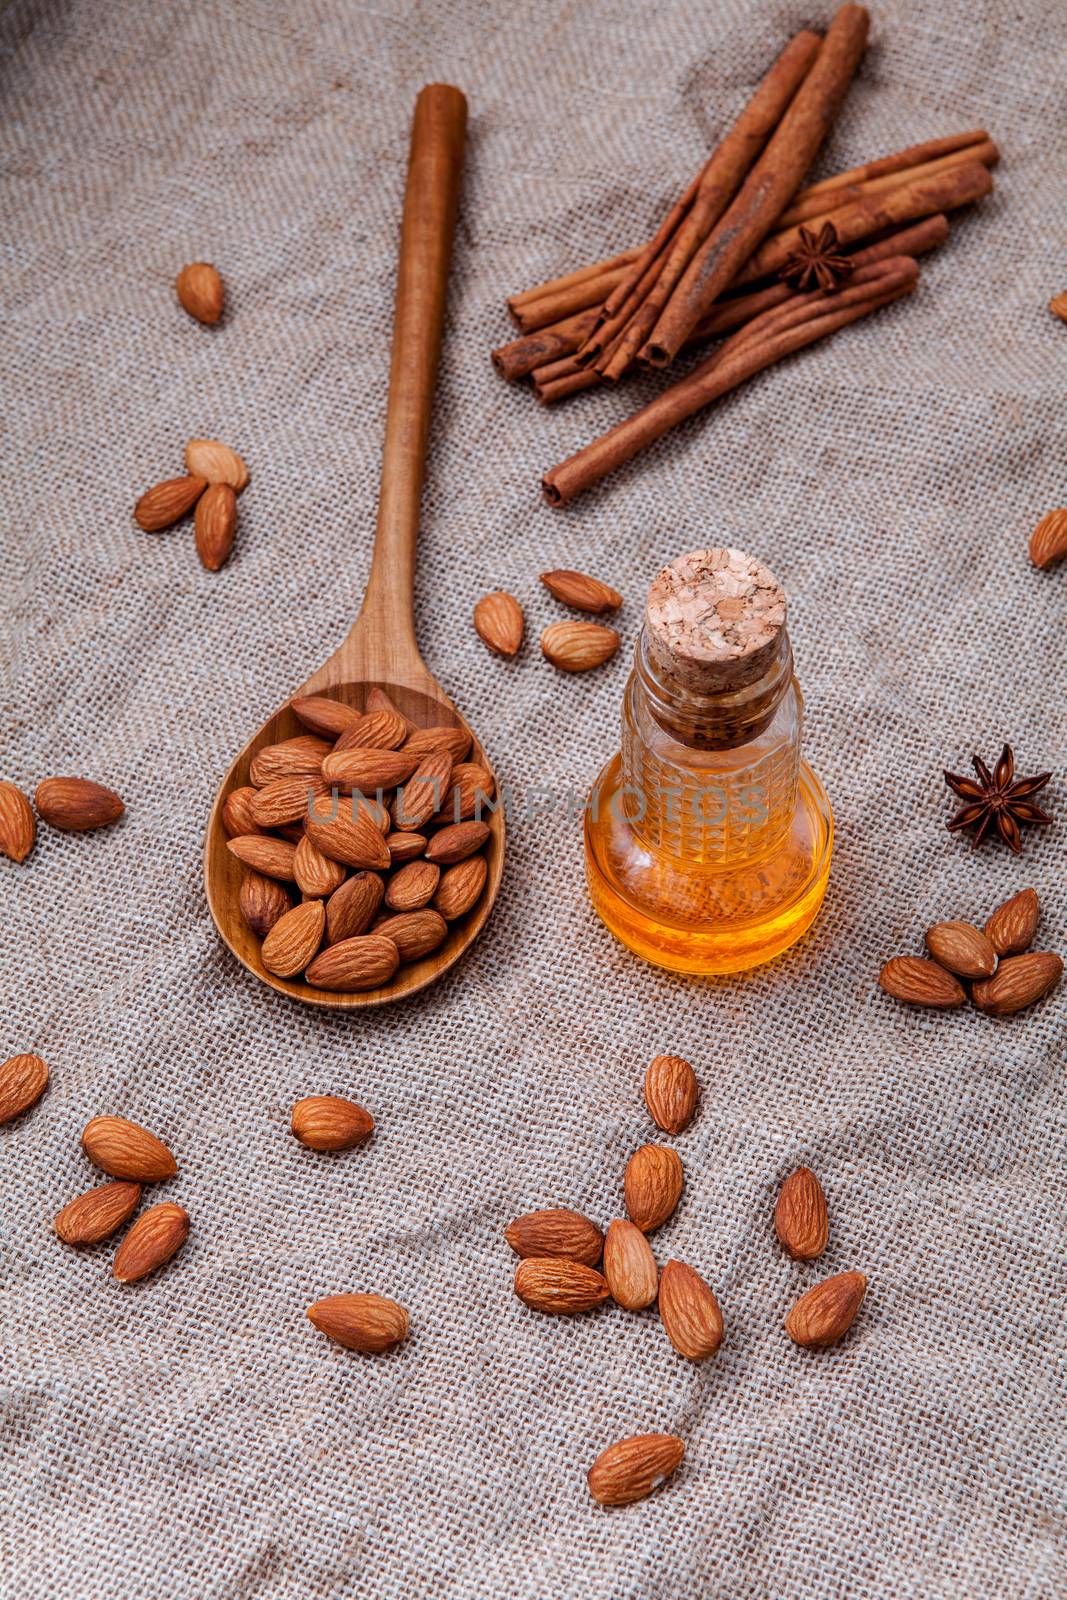 Bottle of extra virgin almonds oil with whole almonds and cinnamon sticks on hemp sack background.